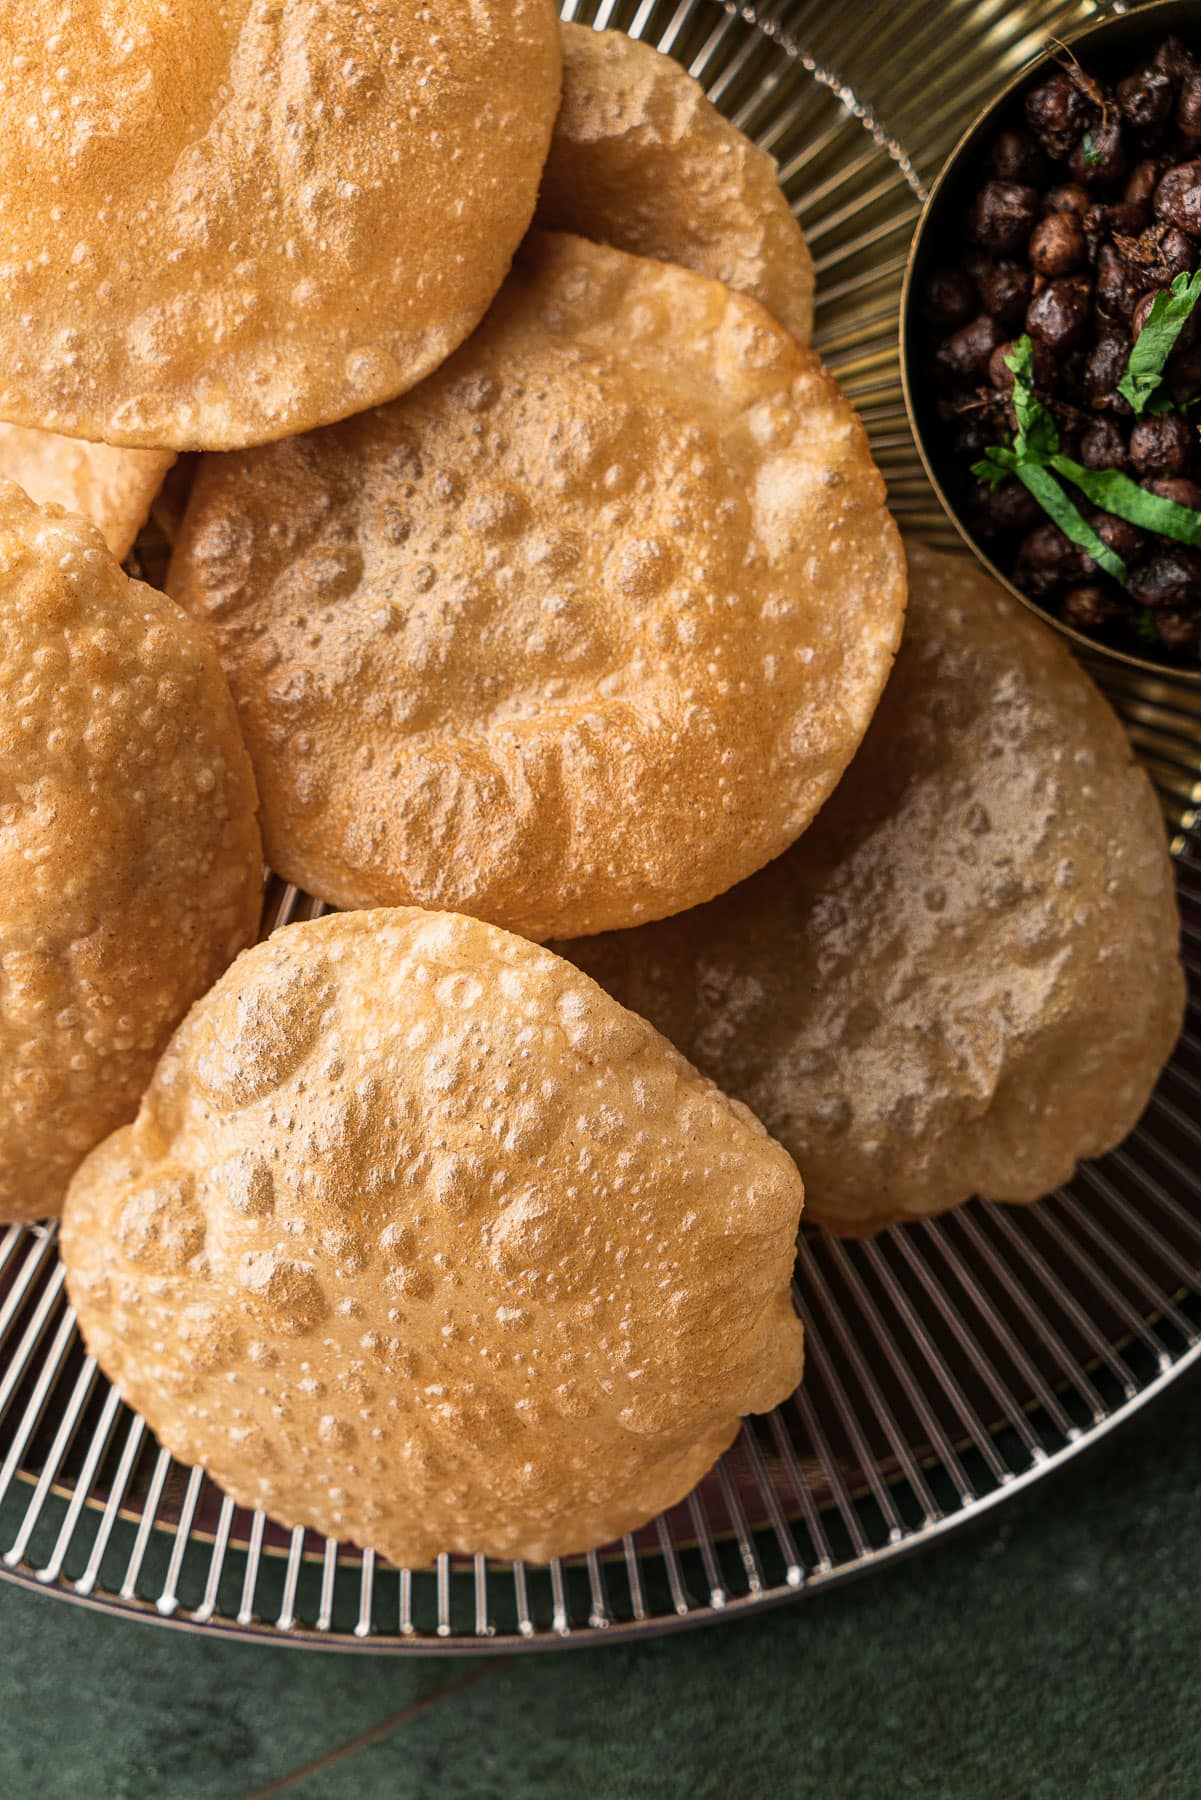 Pile of puris on a serving platter with a side of kala chana.